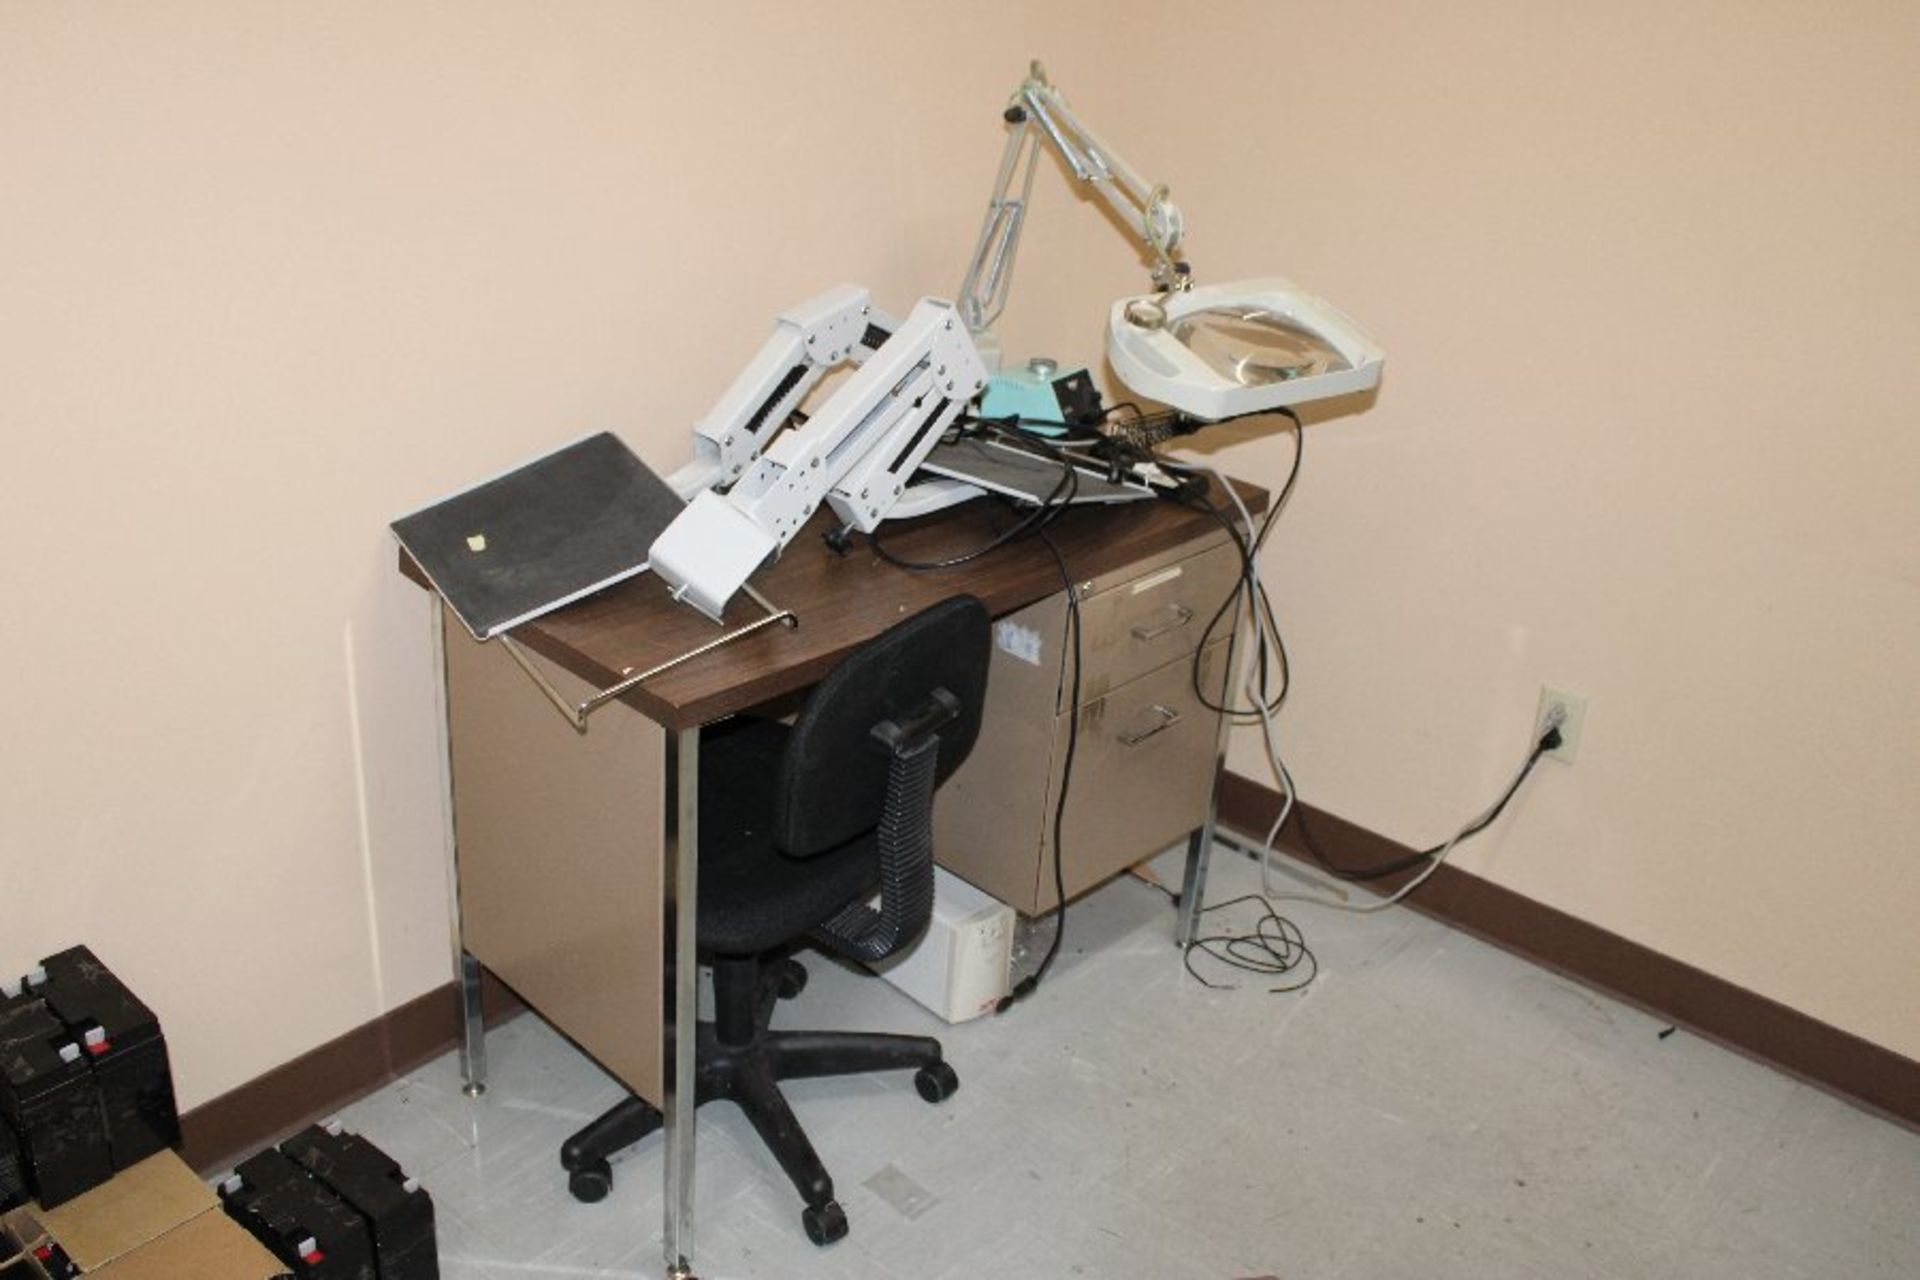 Remaining Contents Of Office: Electronics, Switch view, Premiere Signature Pro Color Printer, (2) - Image 4 of 4